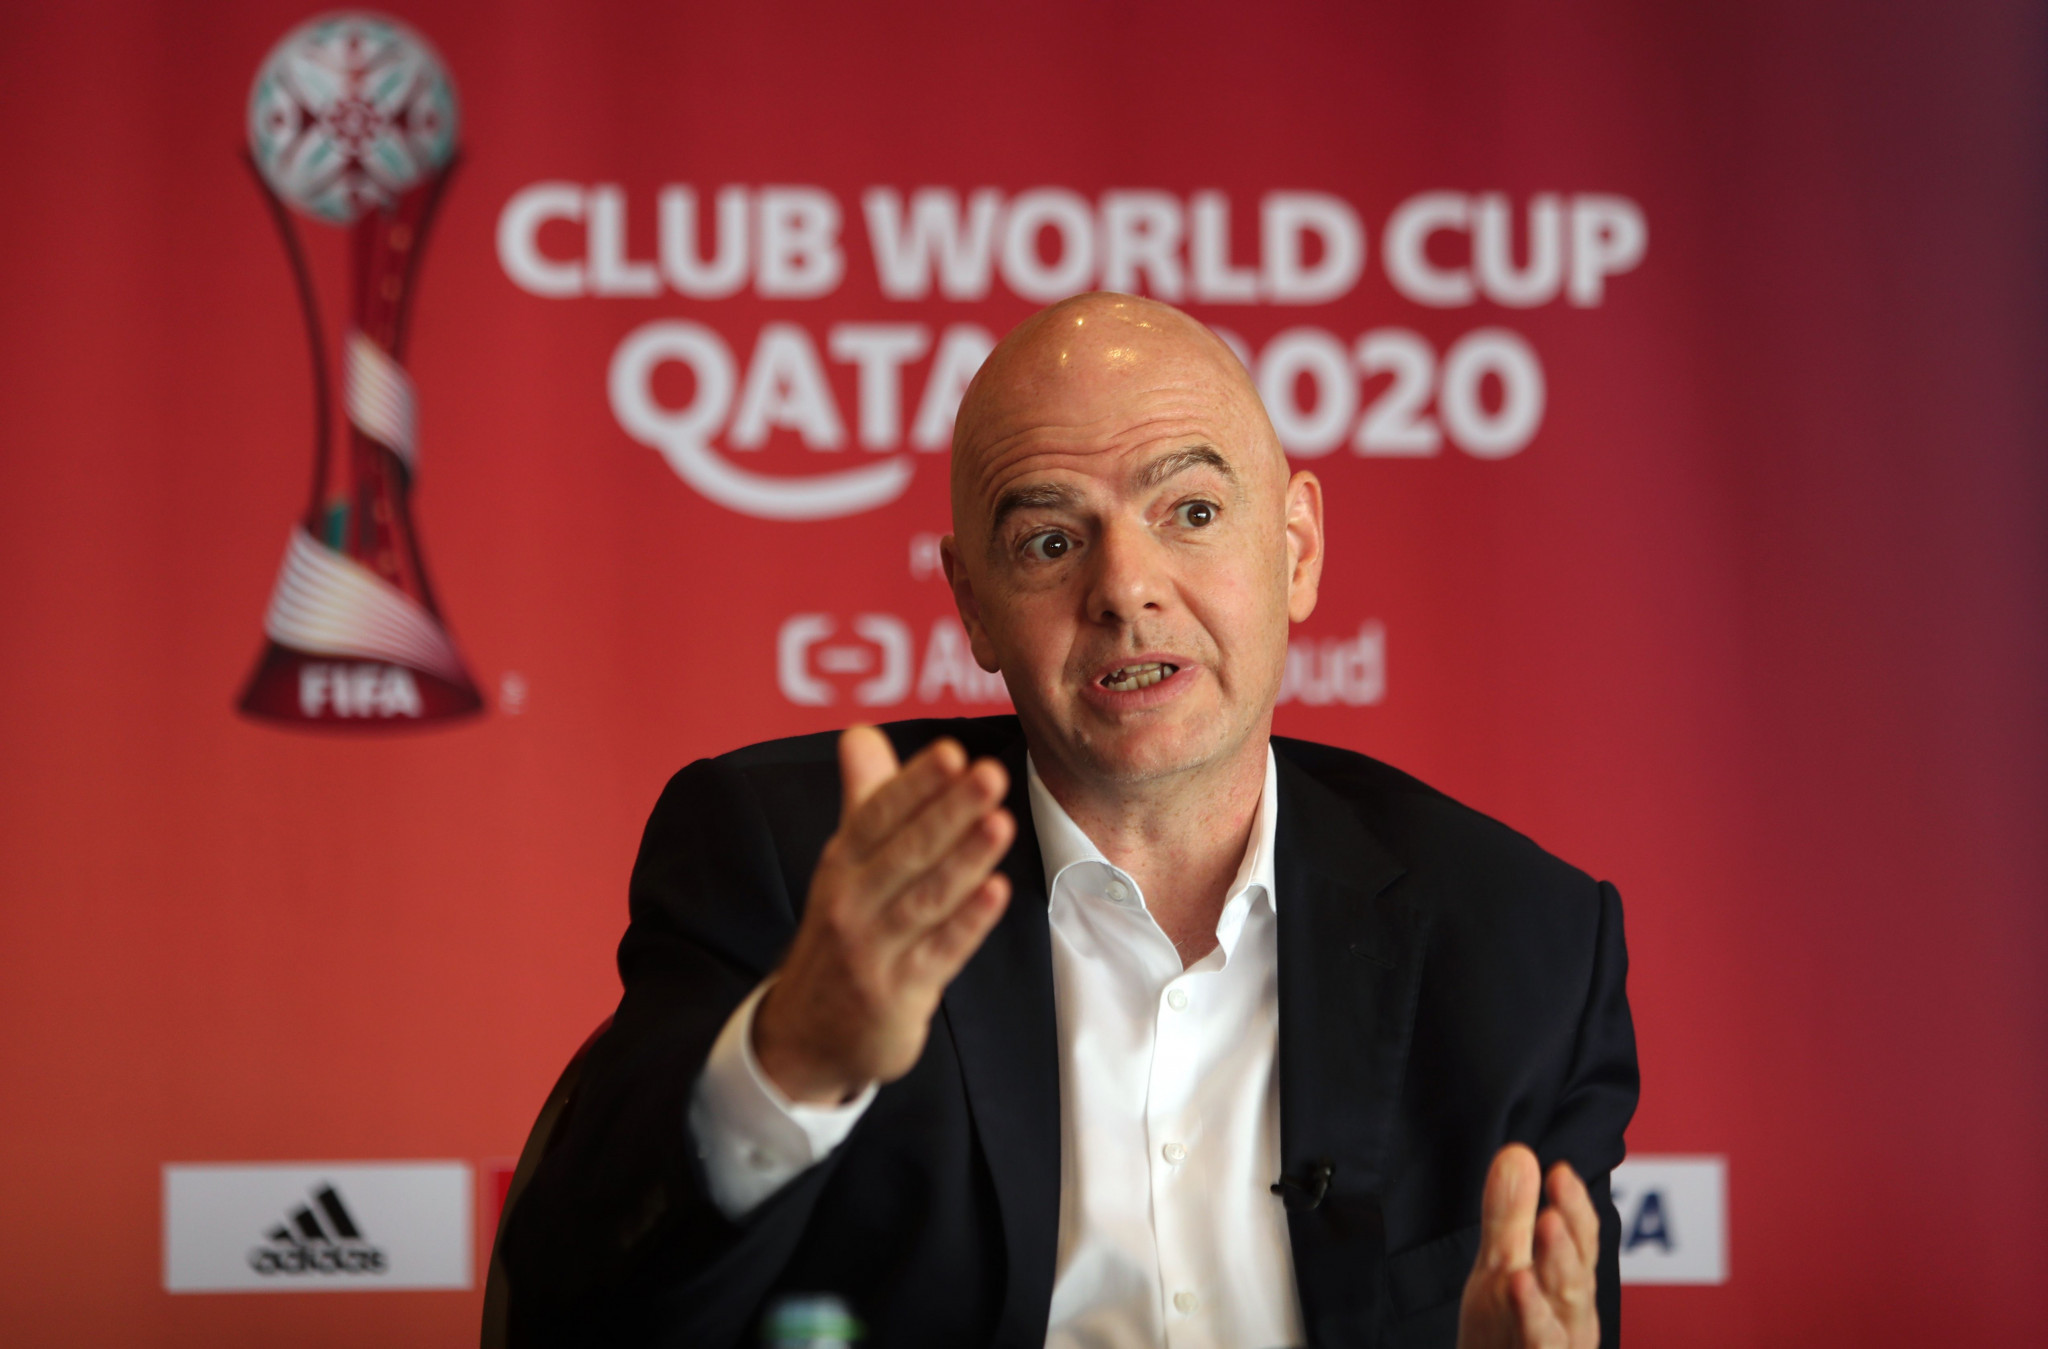 Amnesty International calls on FIFA to urge Qatar to fulfil labour reforms ahead of World Cup